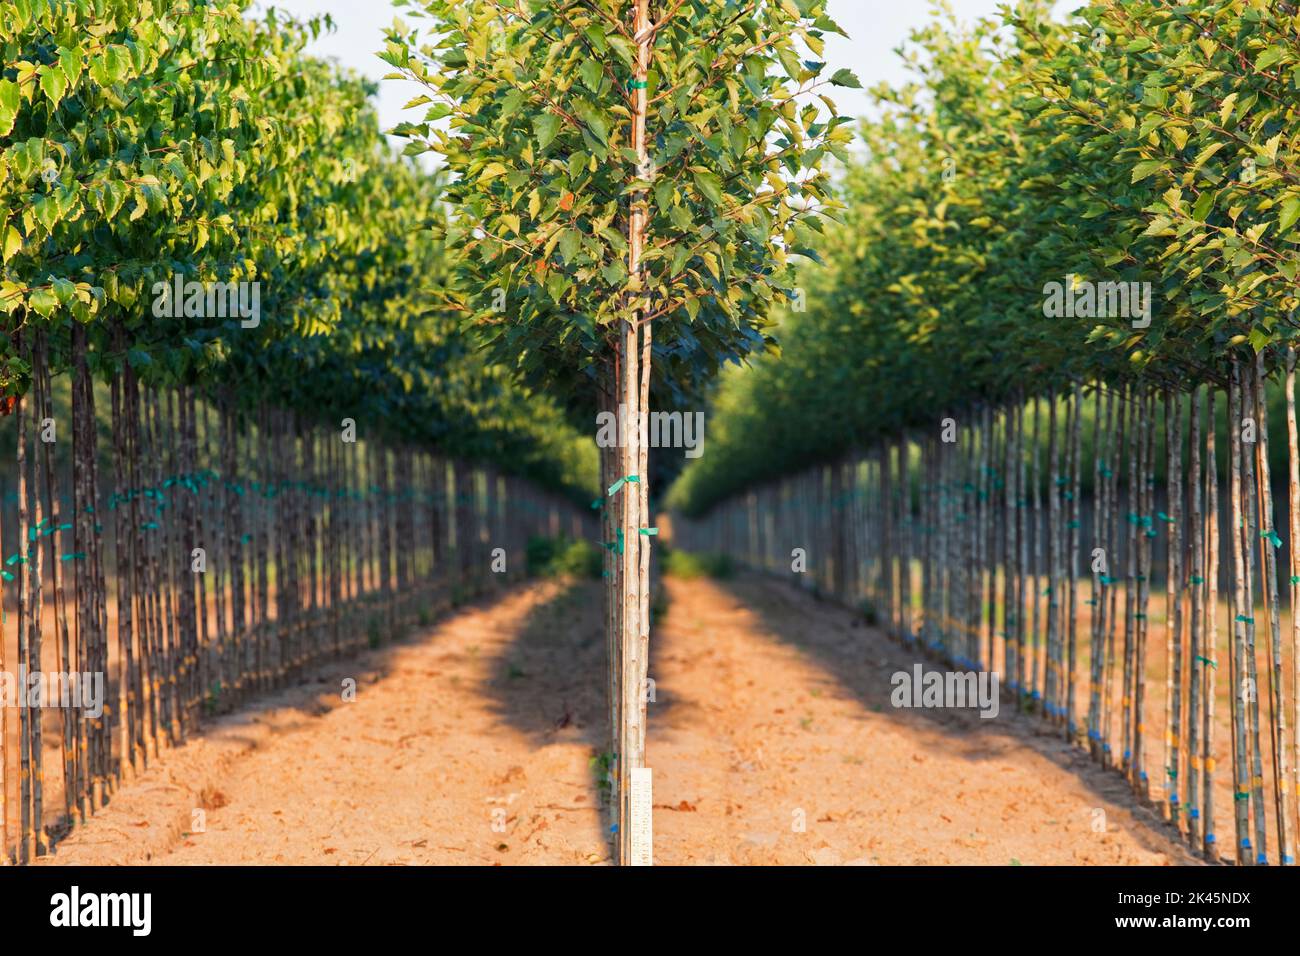 A tree nursery, rows of young sapling trees being grown Stock Photo